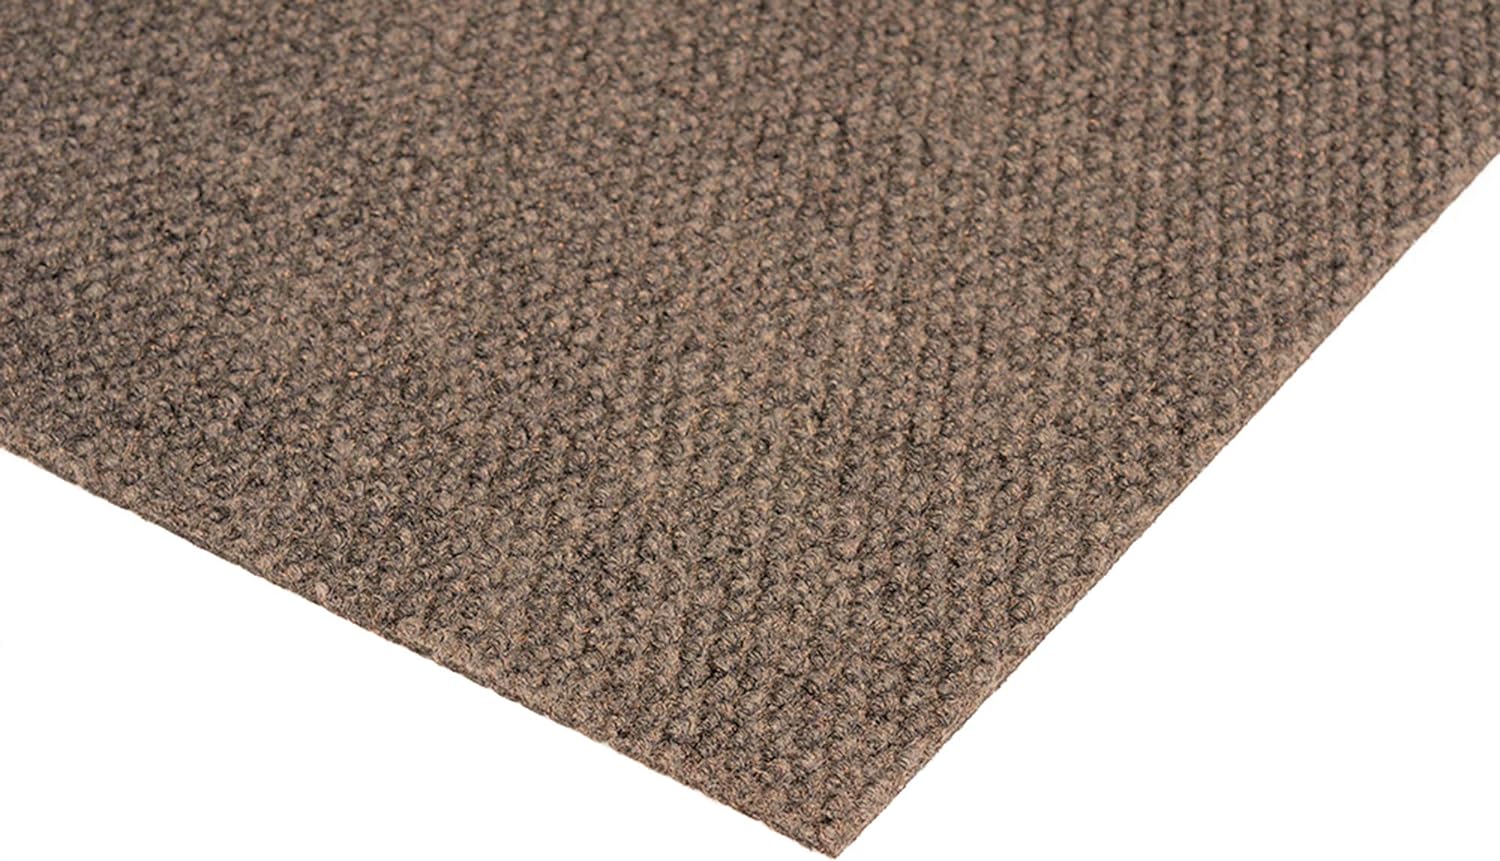 Koeckritz Rugs Hobnail Design Durable Outdoor Area Rugs Constructed with Superior Soft PET Fiber (Color: Espresso)